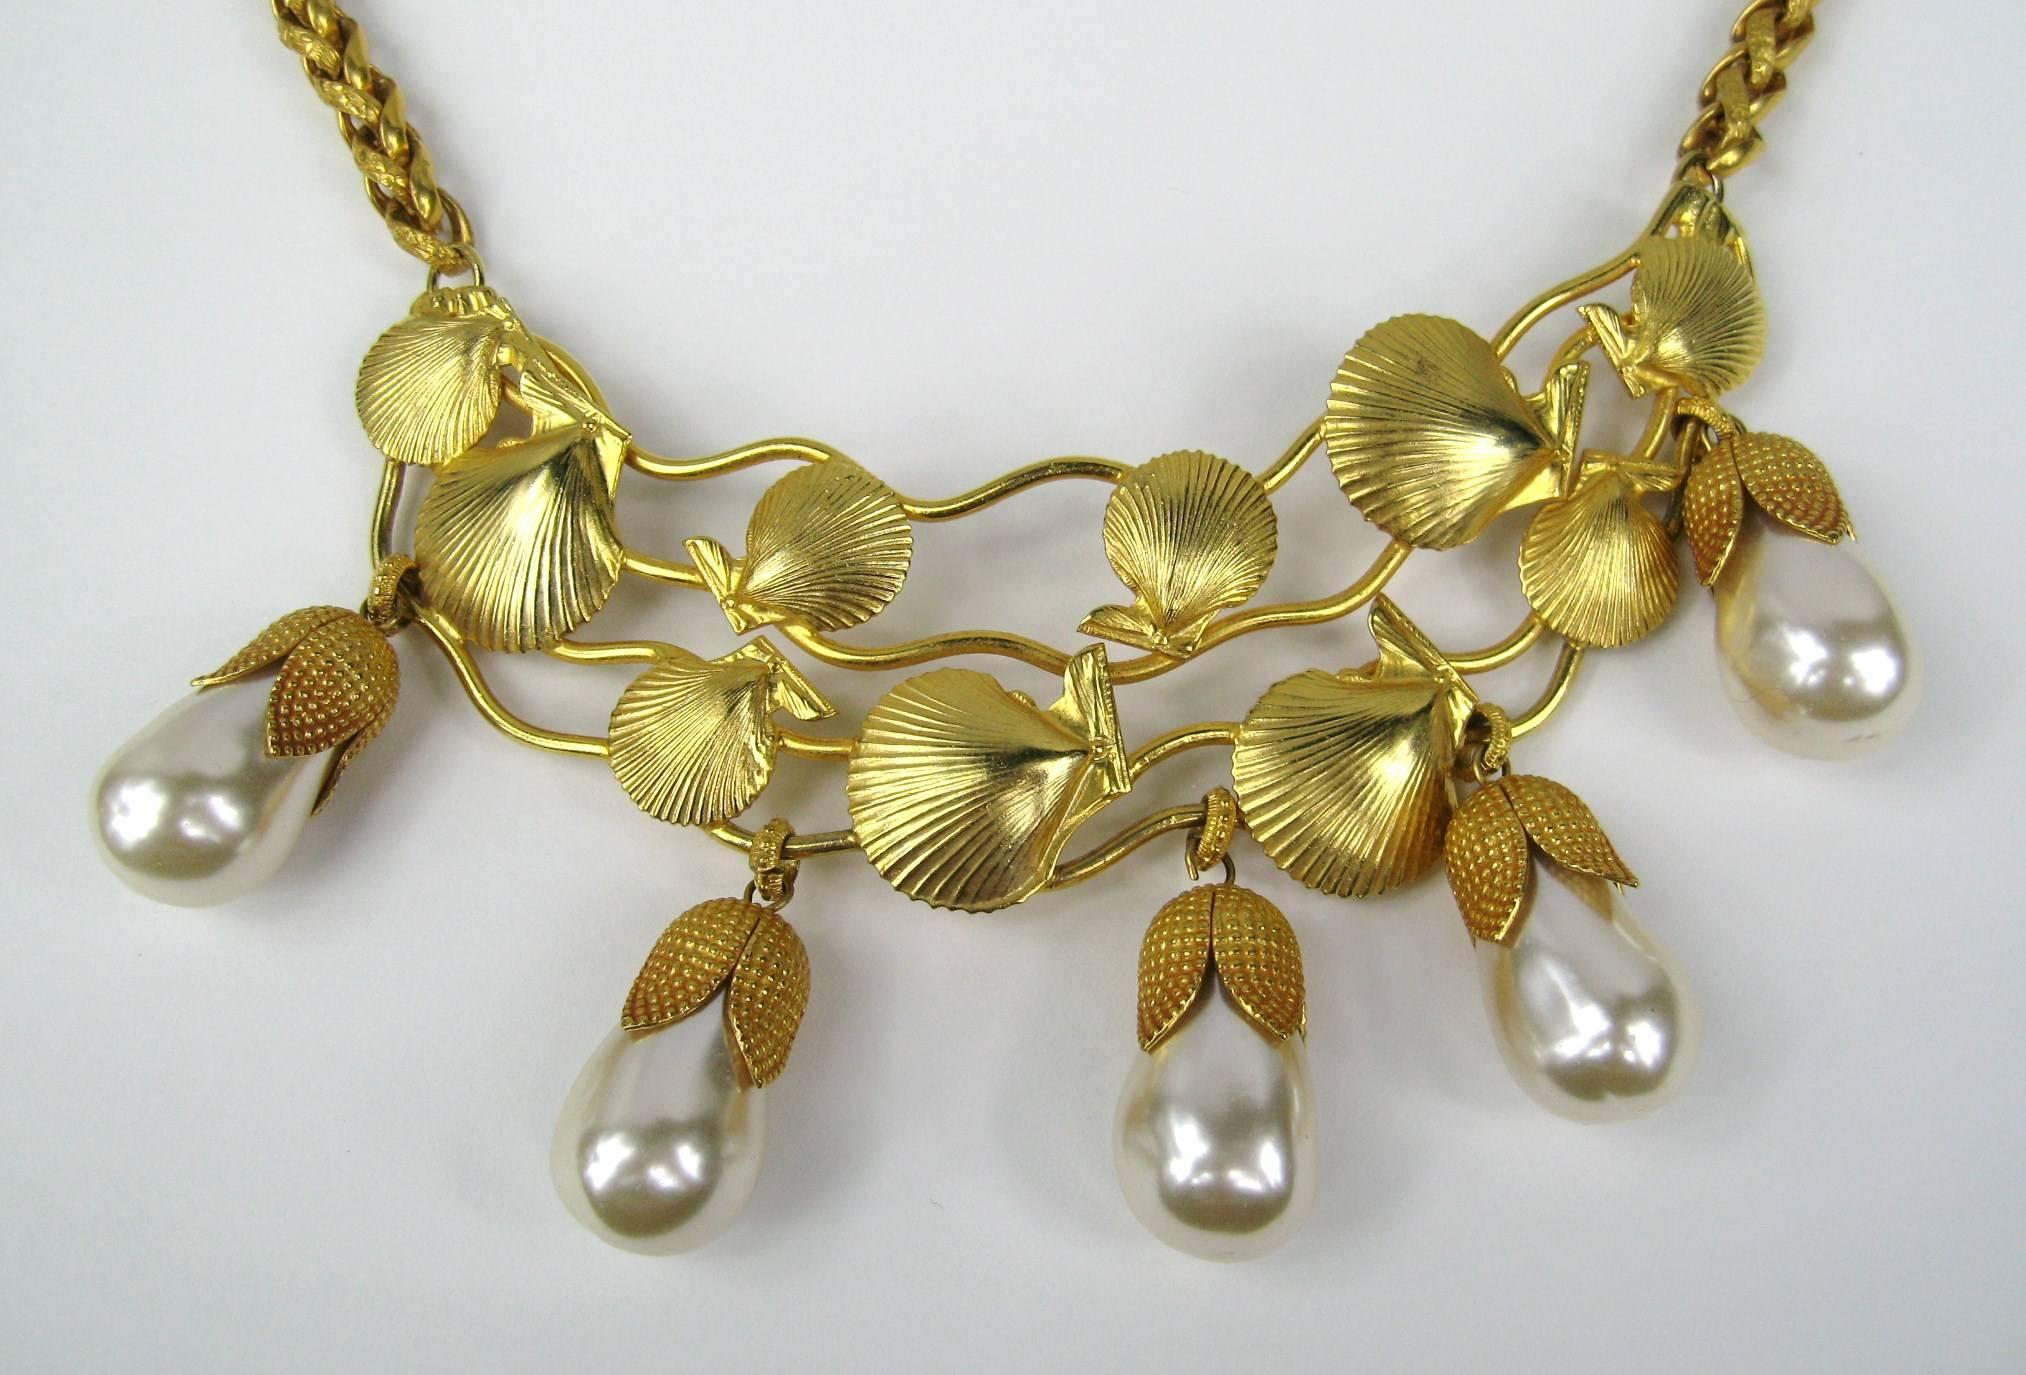 Dominique Aurientis Gold Gilt Faux Pearl Drop necklace with a stunning Shell Motif. Necklace measures 17 inches end to end Drops down 2.75. This French jewelry designer has a vast international customer base and is known throughout the world for her